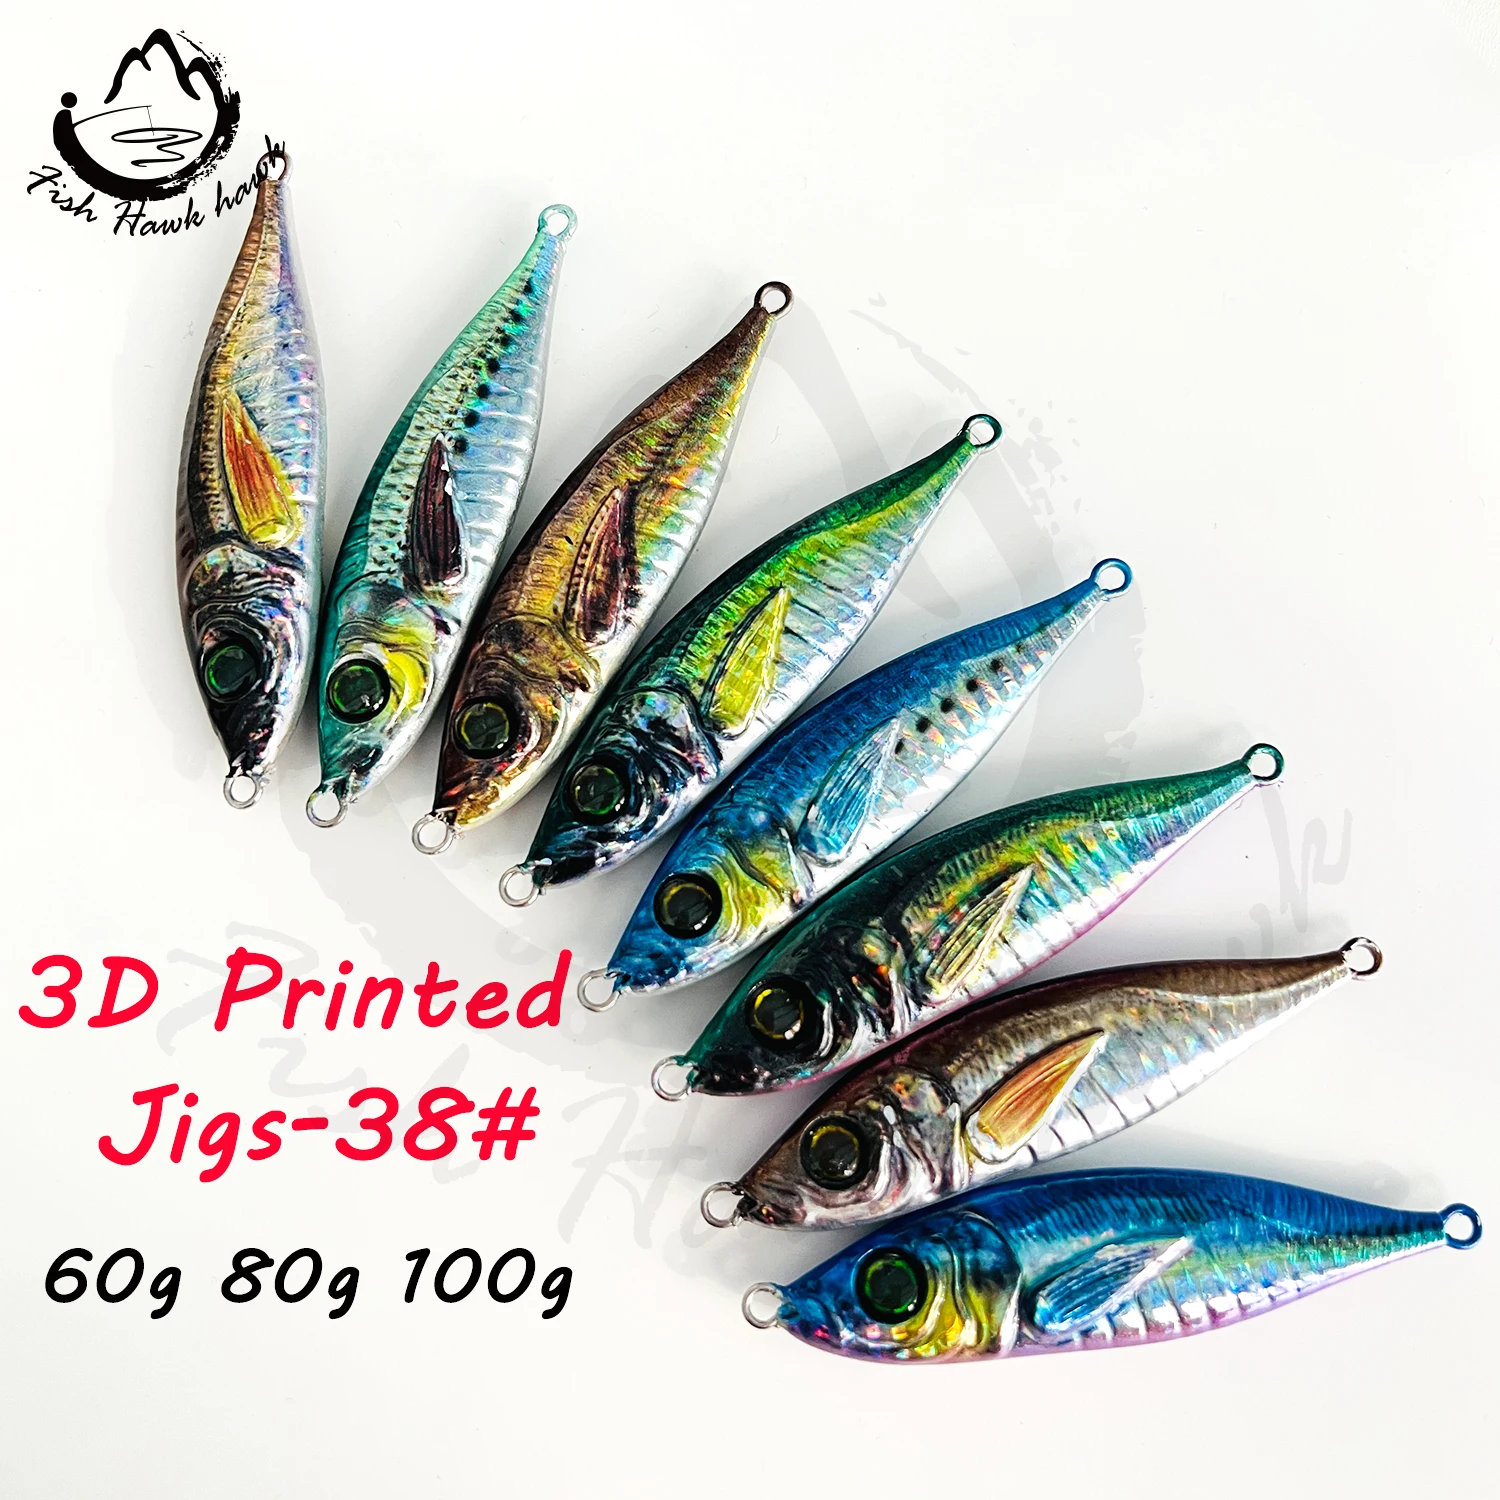 

New 7g 10g 14g 21g 28g 40g 60g 80g Metal Casting Jigs fishing lure for Jigging Spoon Saltwater Artificial Bait, 8 colors